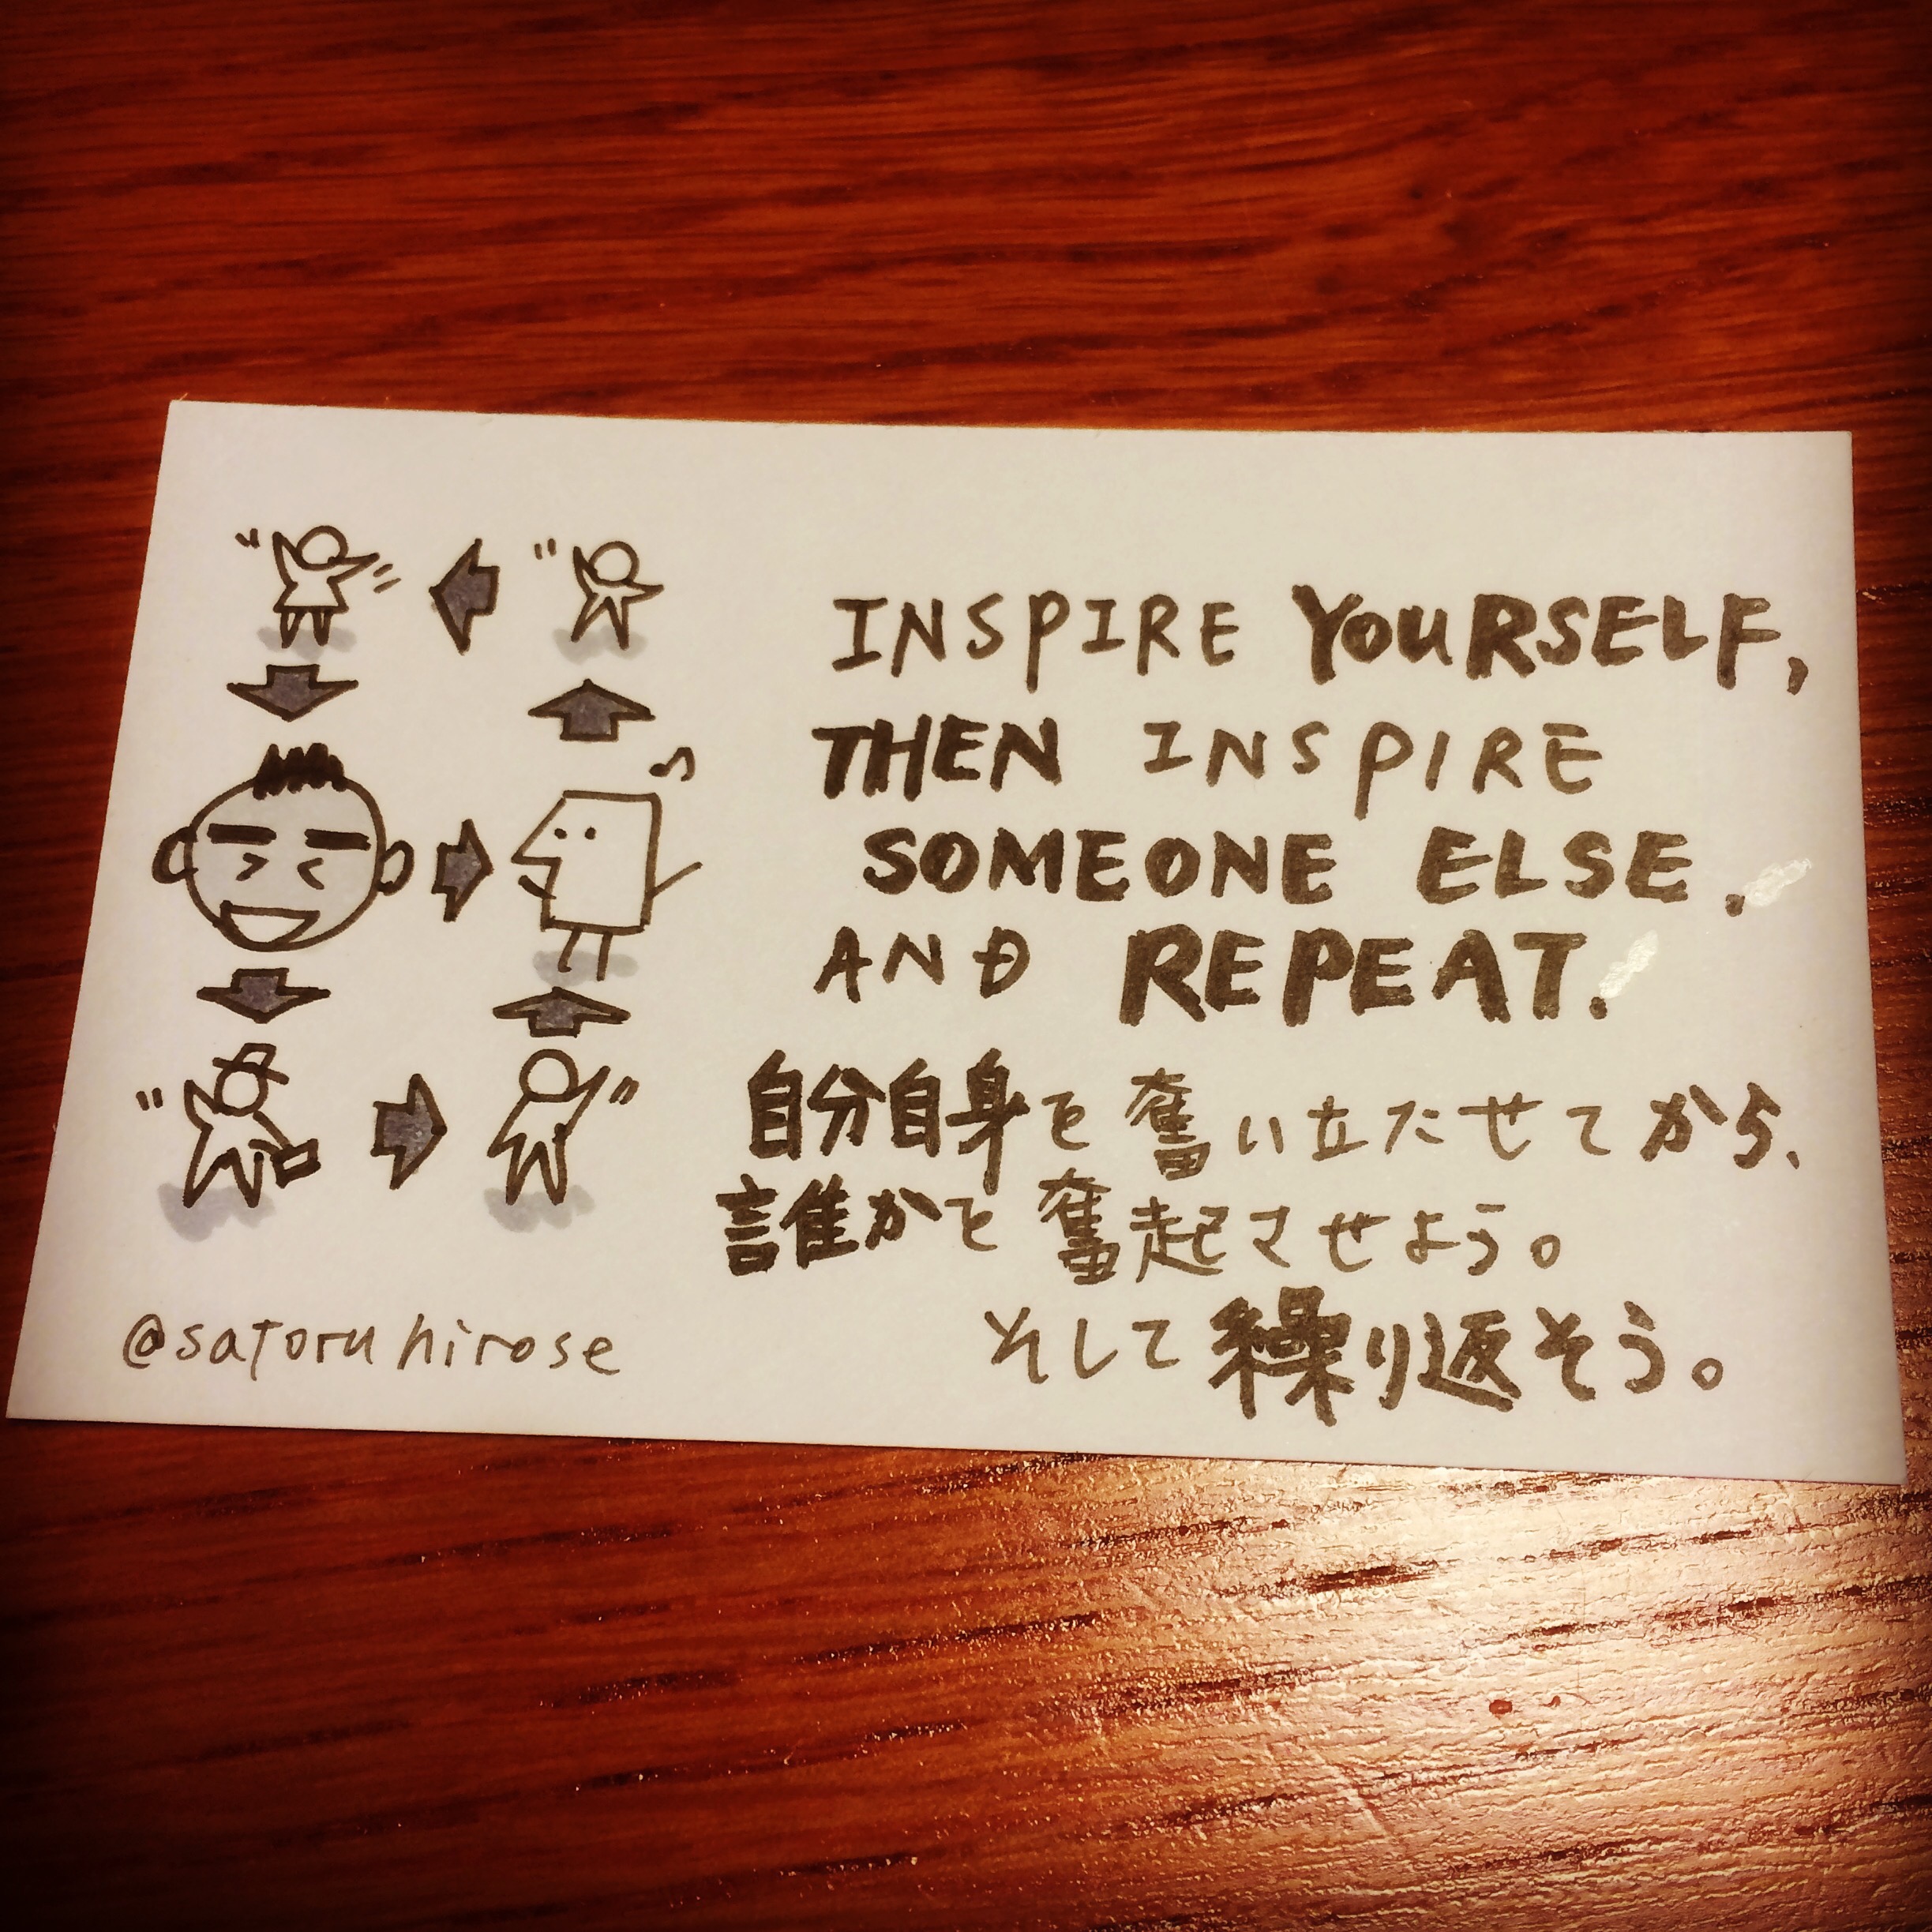 Inspire yourself, then inspire someone else. And repeat.